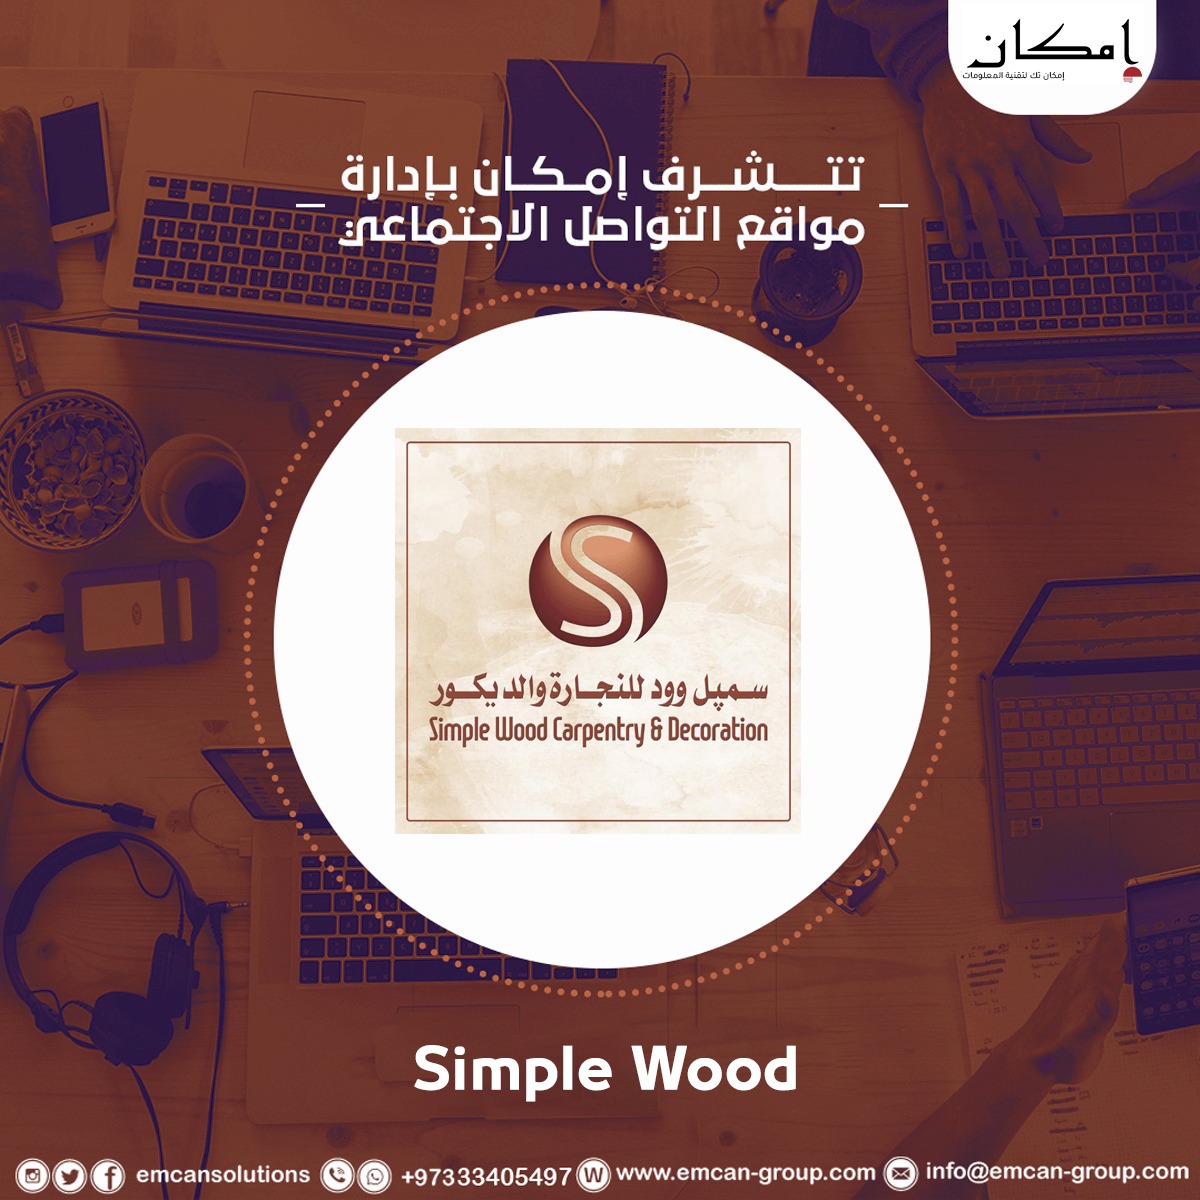 Social media management for Simple Wood Carpentry and Decoration Company